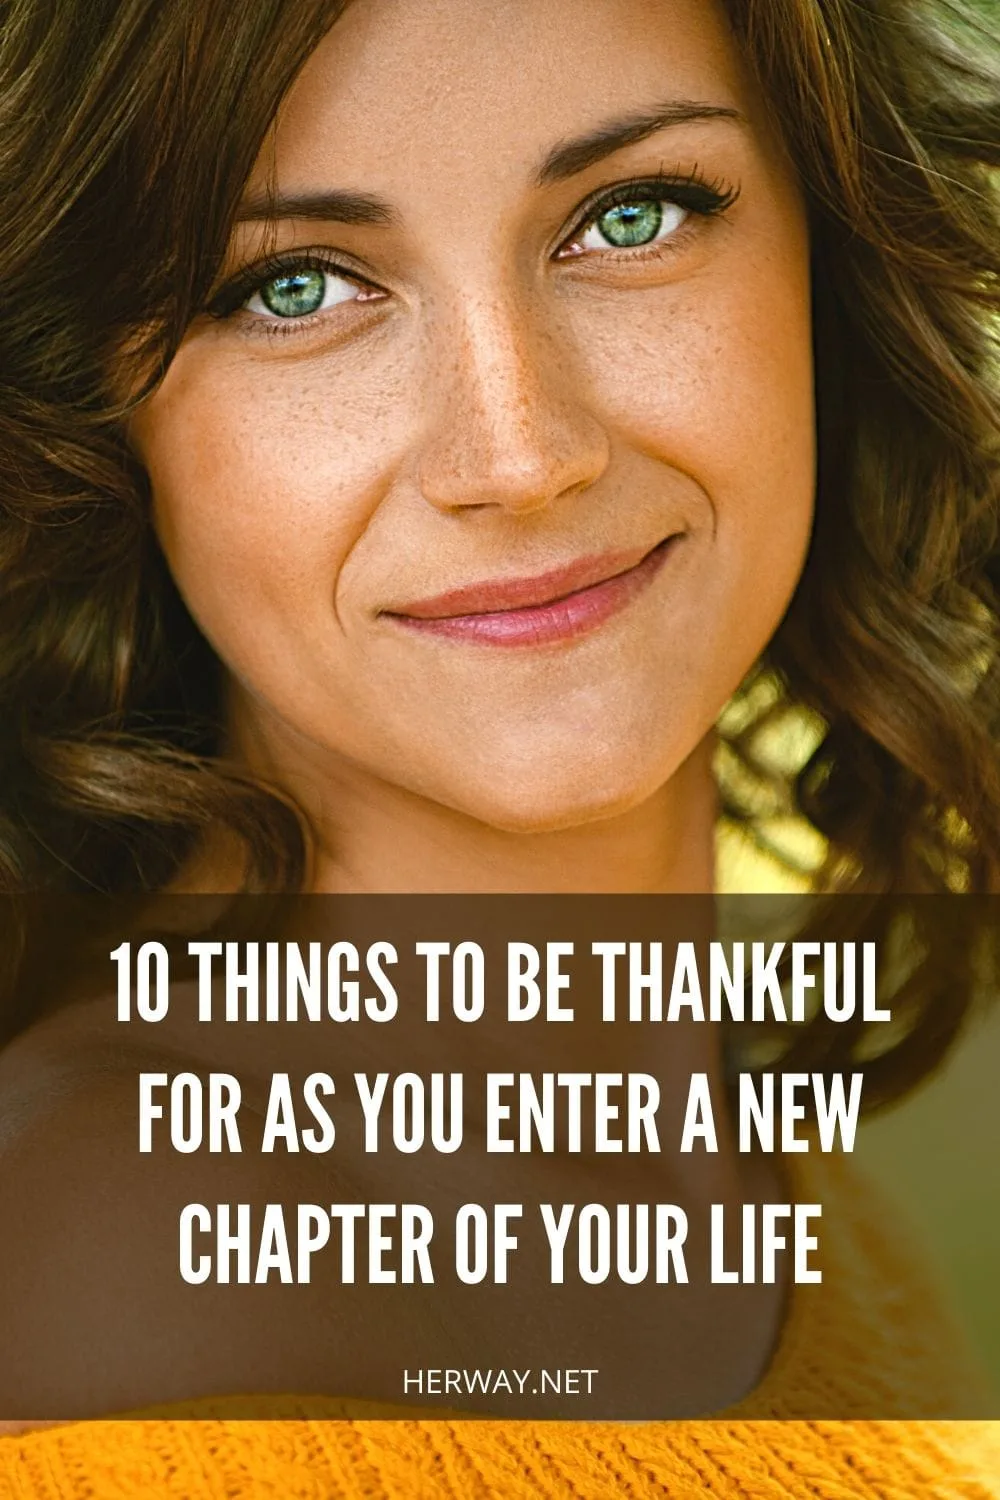 10 Things To Be Thankful For As You Enter A New Chapter Of Your Life